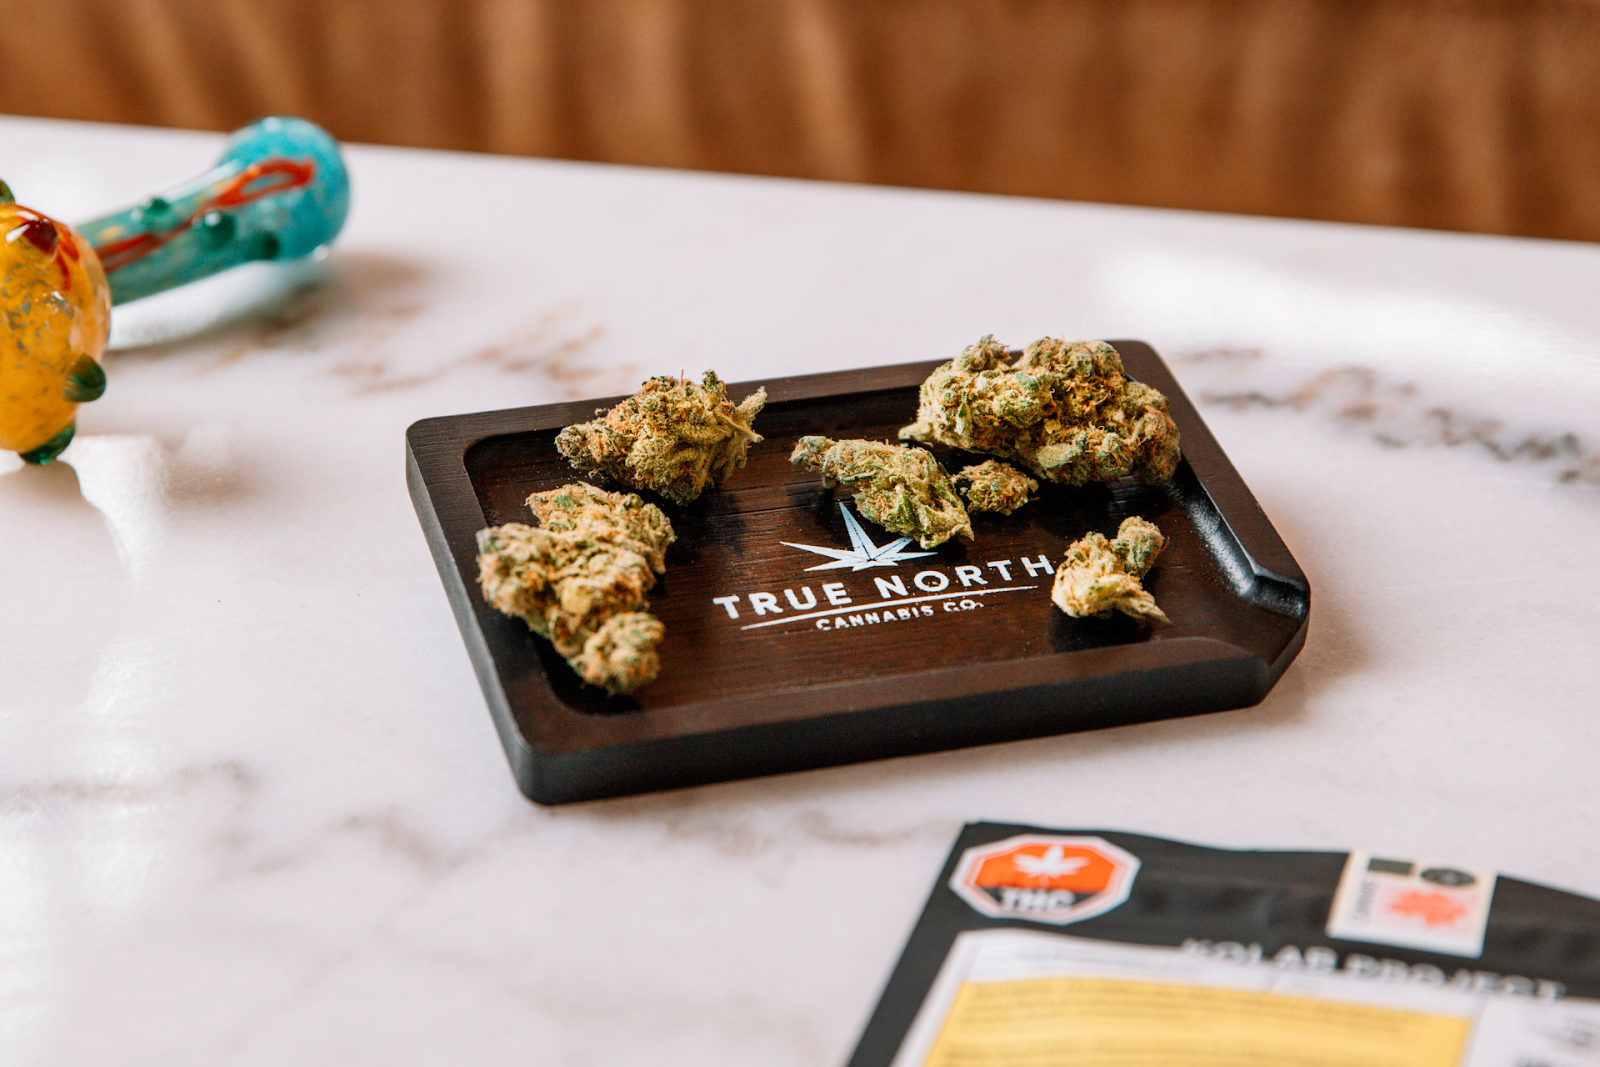 cannabis flowers on a tray next to a pipe